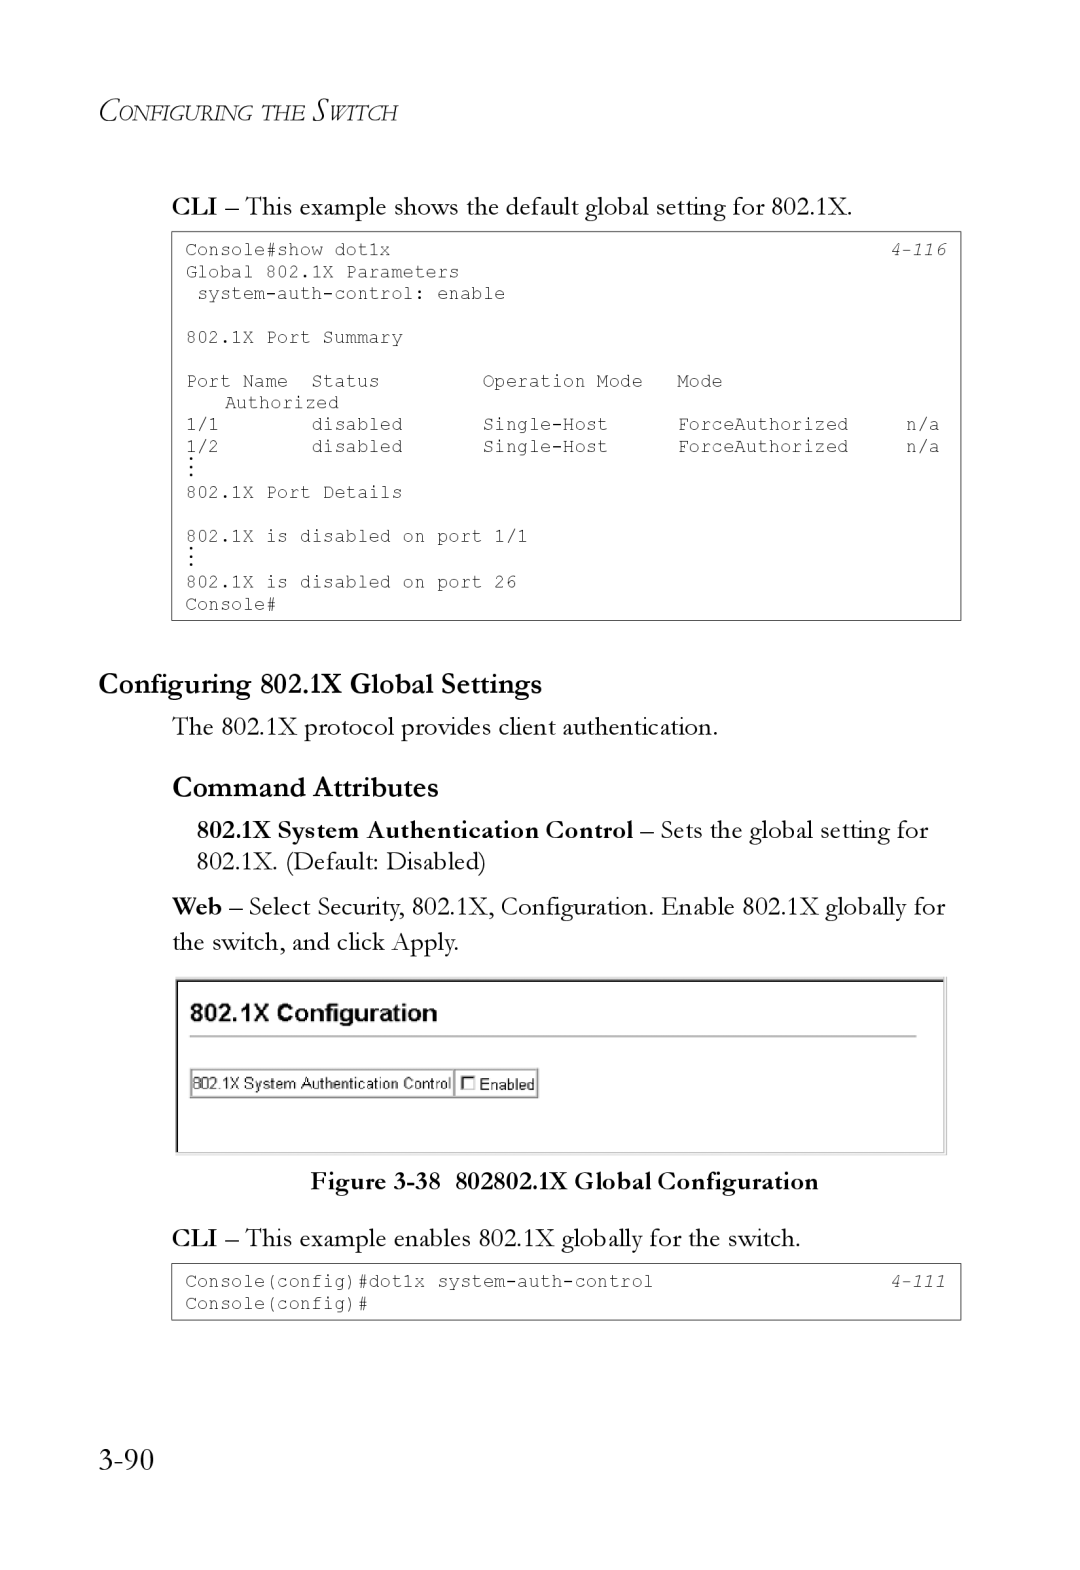 SMC Networks SMC6824M manual Configuring 802.1X Global Settings, CLI This example shows the default global setting for 